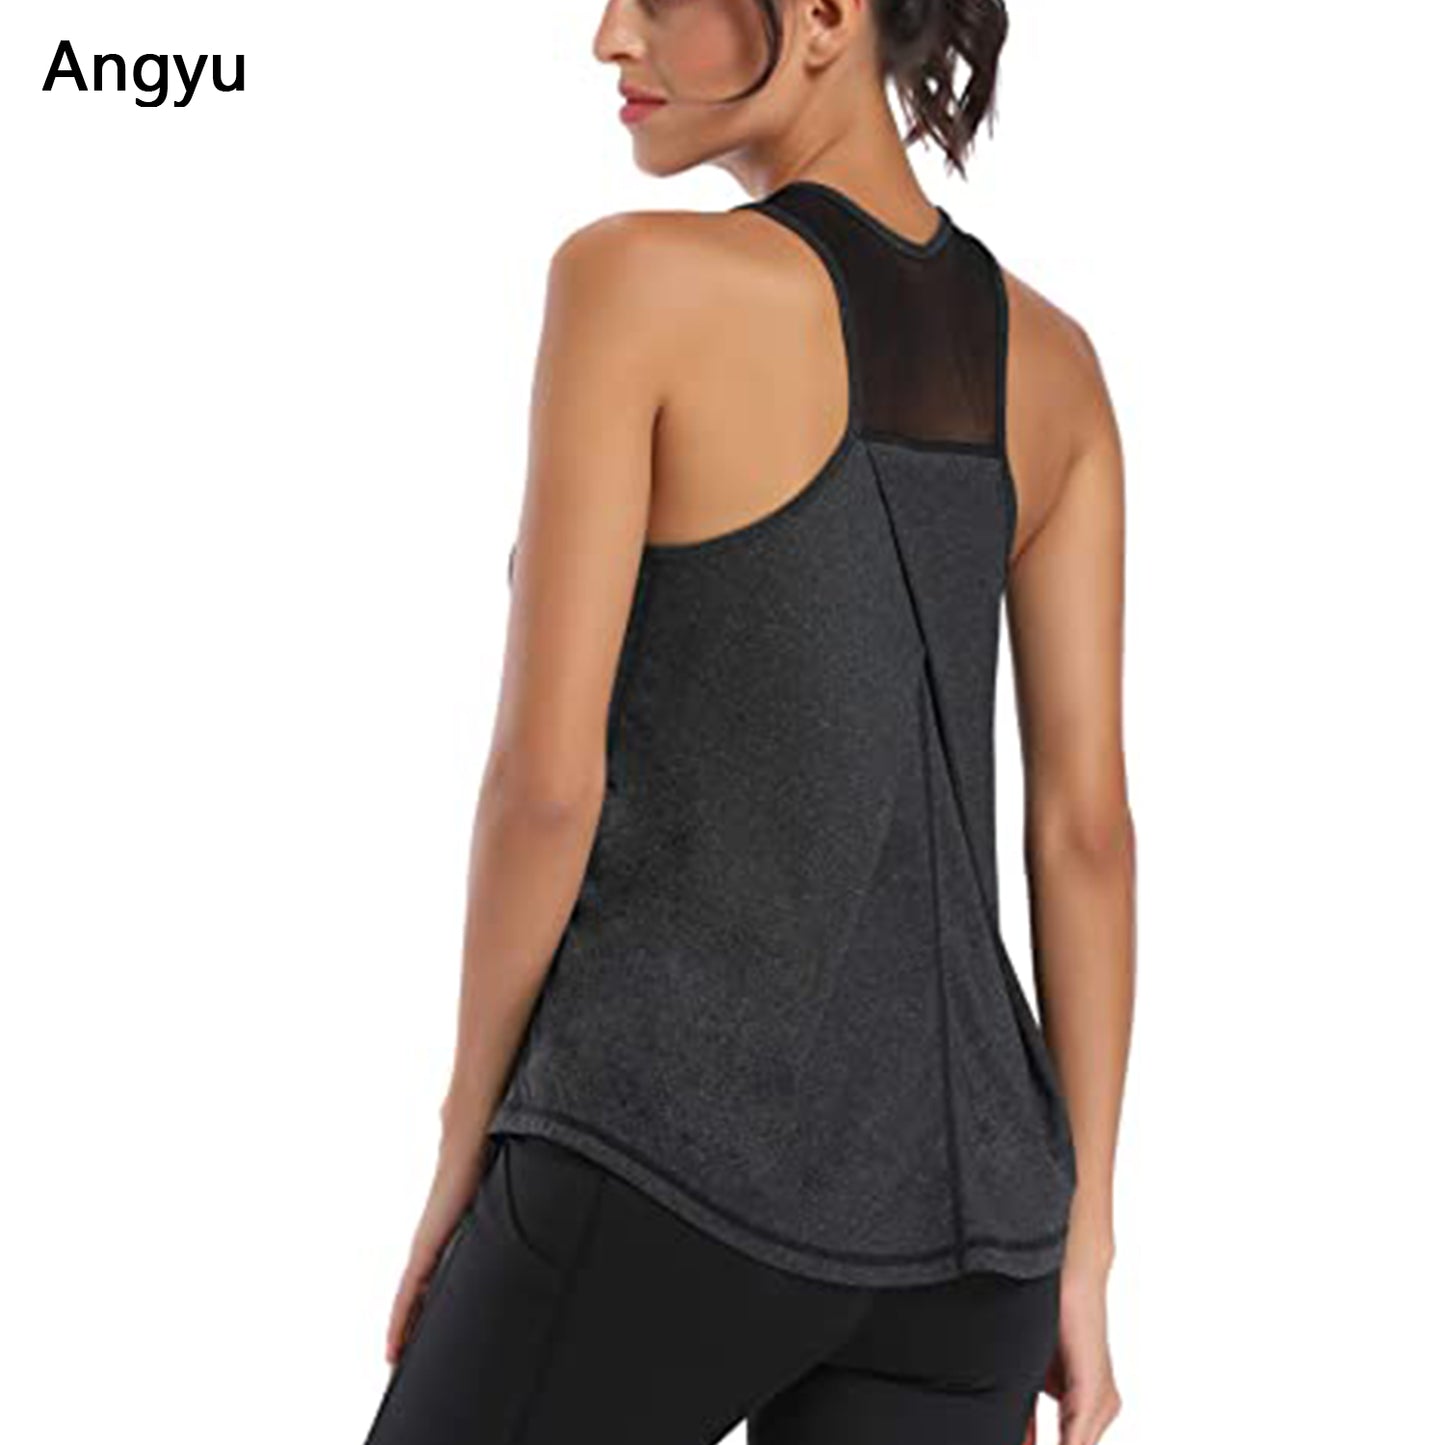 Angyu Workout Tops for Women